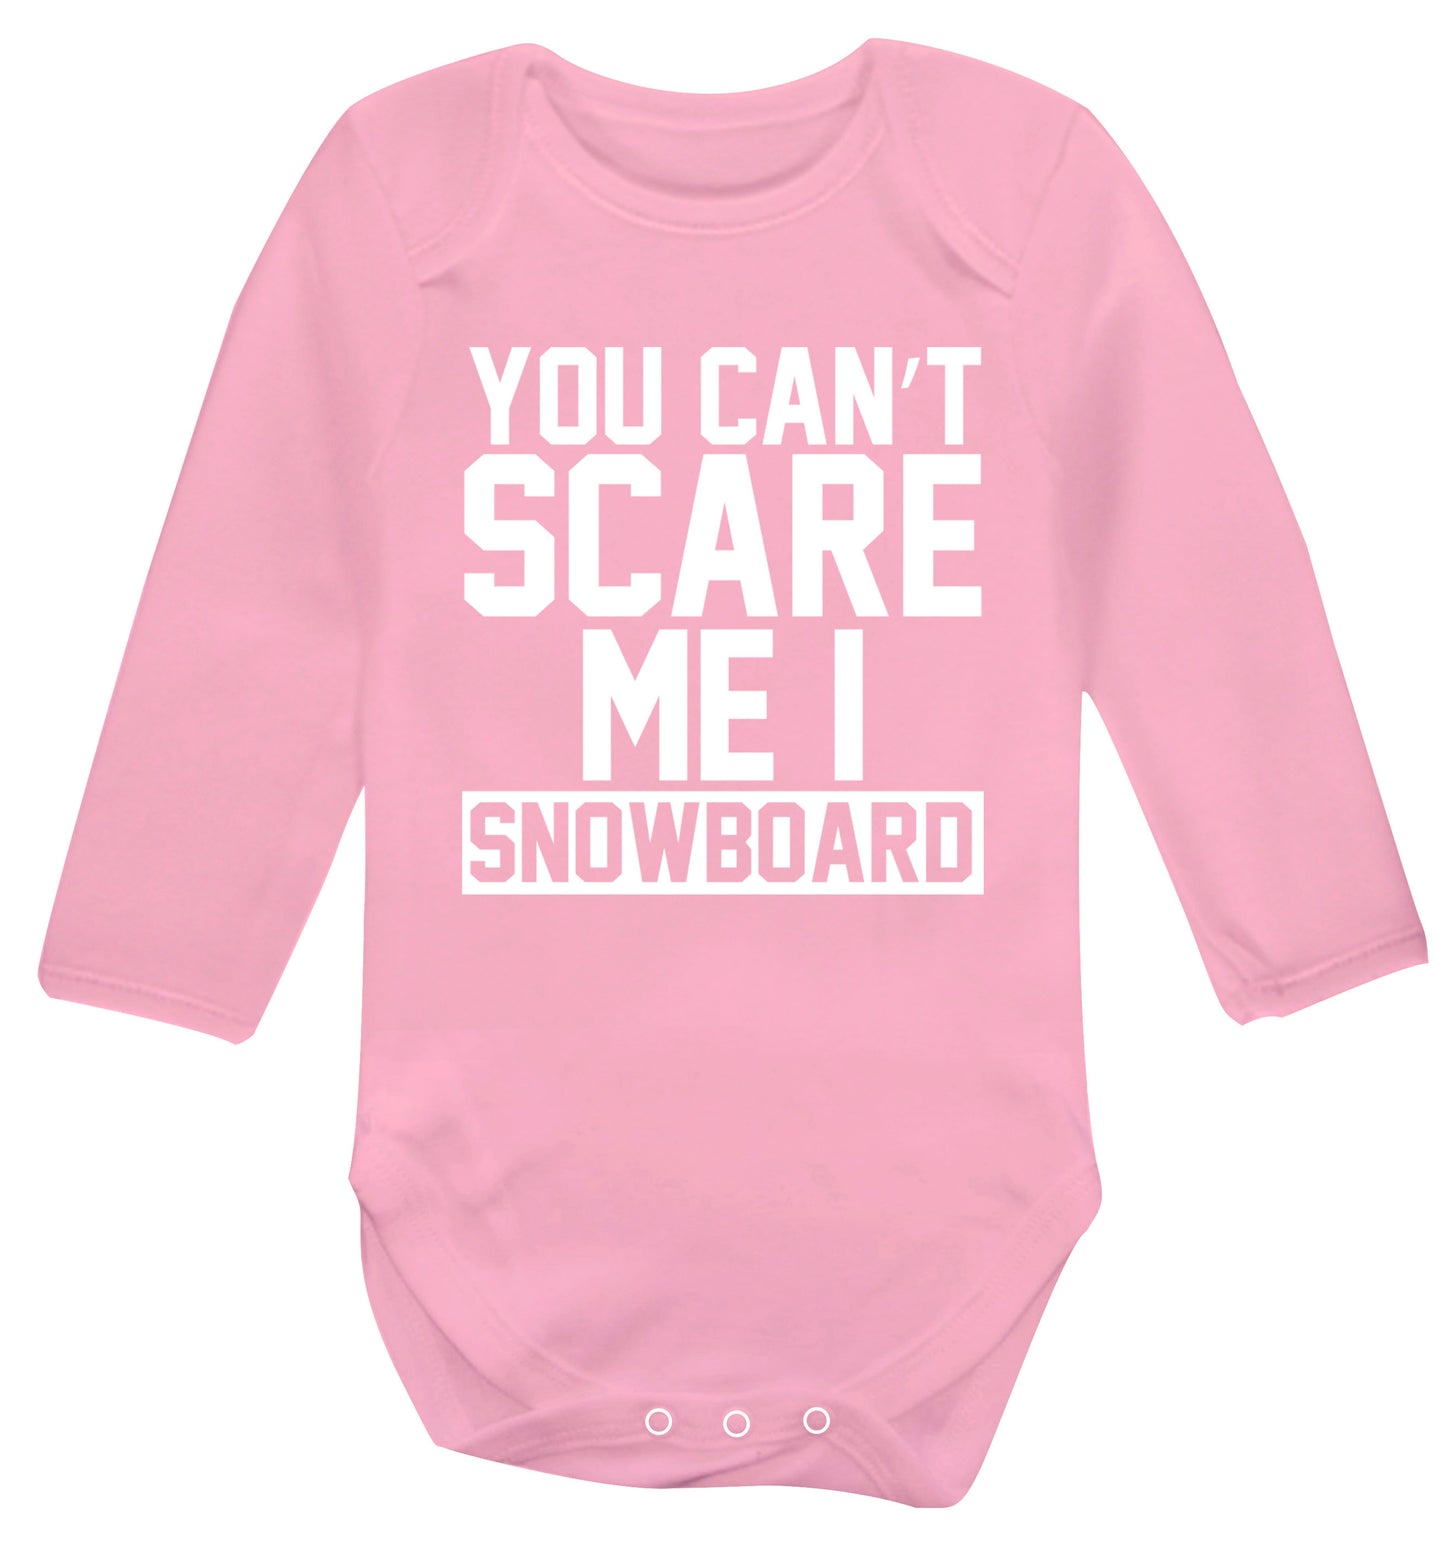 You can't scare me I snowboard Baby Vest long sleeved pale pink 6-12 months